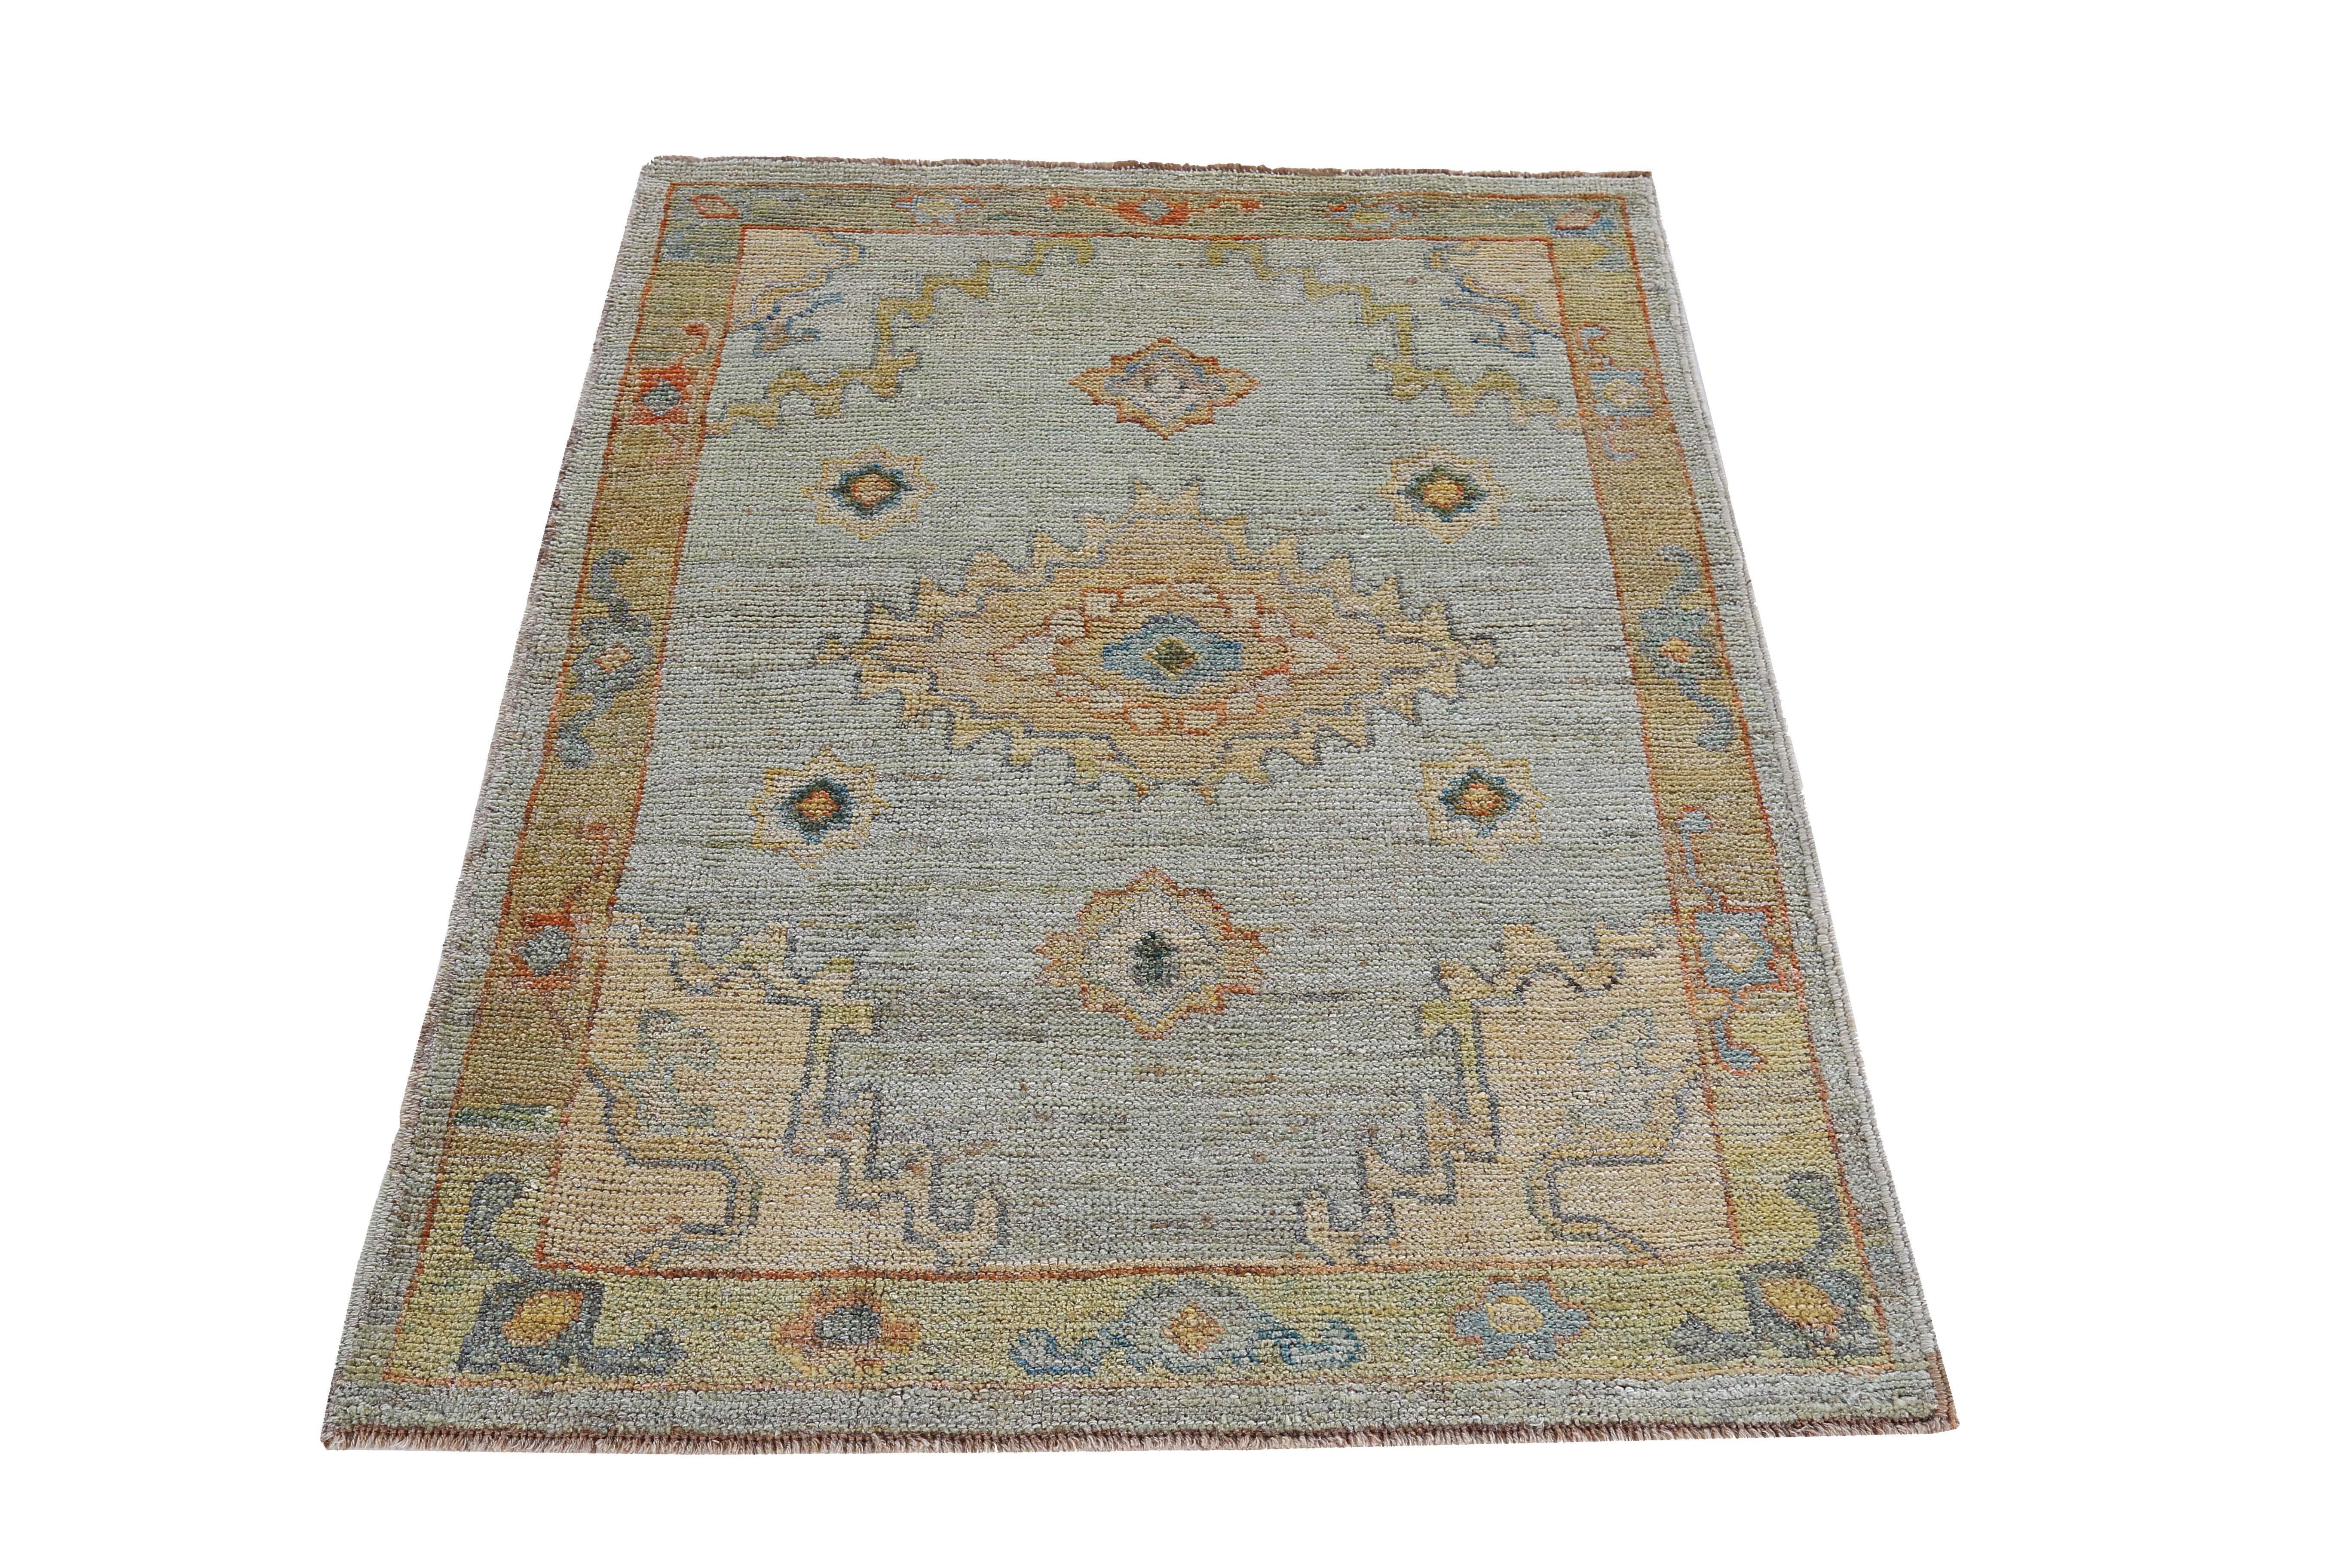 New Turkish rug made of handwoven sheep’s wool of the finest quality. It’s colored with organic vegetable dyes that are certified safe for humans and pets alike. It features floral details in yellow, orange and green over a blue field. Flower